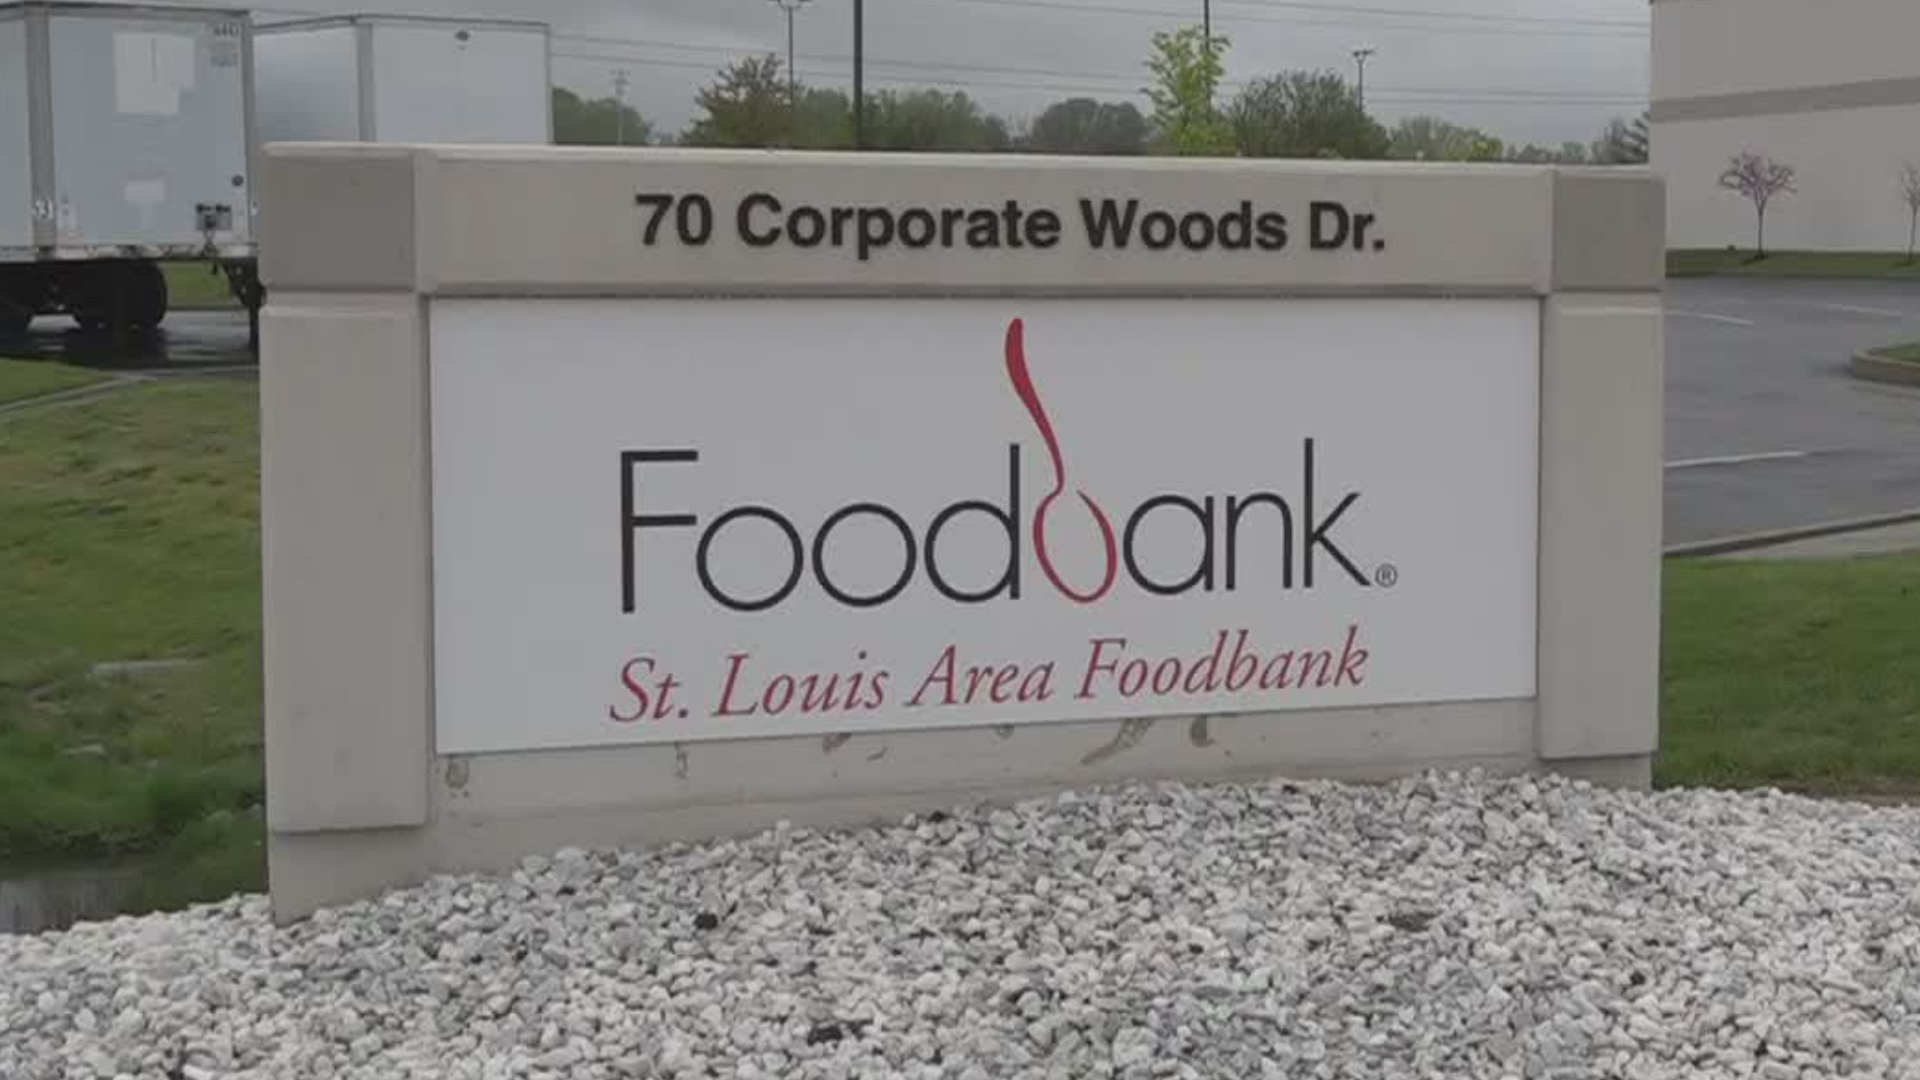 “This is unlike anything we’ve seen in the 45-year history of the St. Louis Area Foodbank”